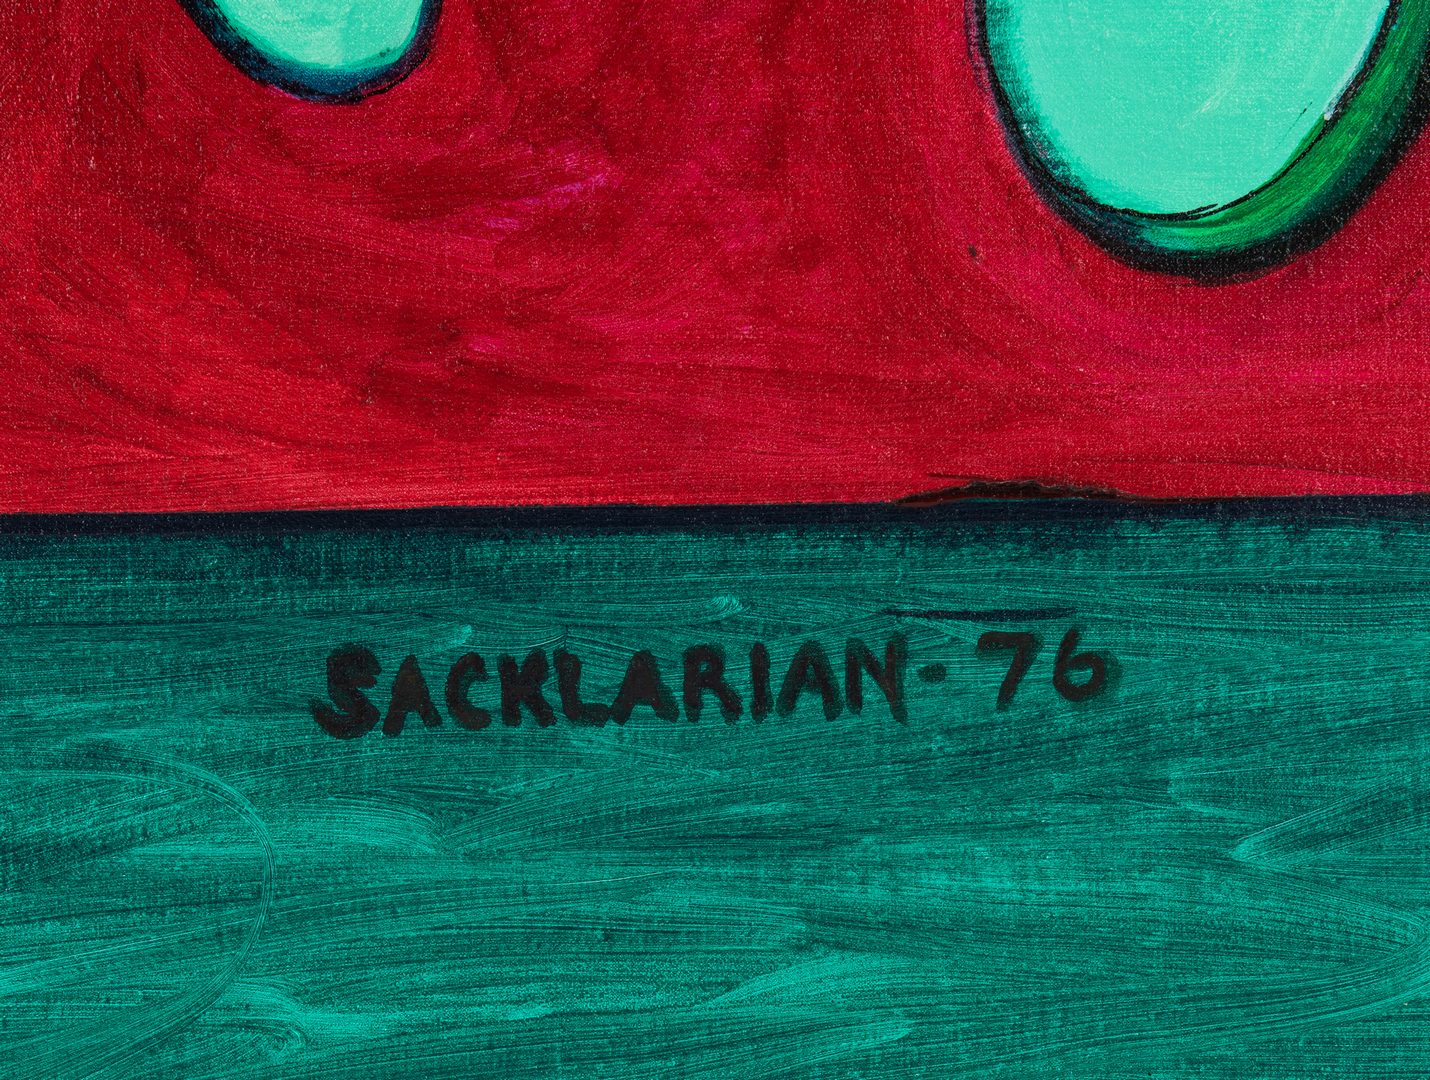 Lot 542: Reality of Unreality (E-9) by Sacklarian